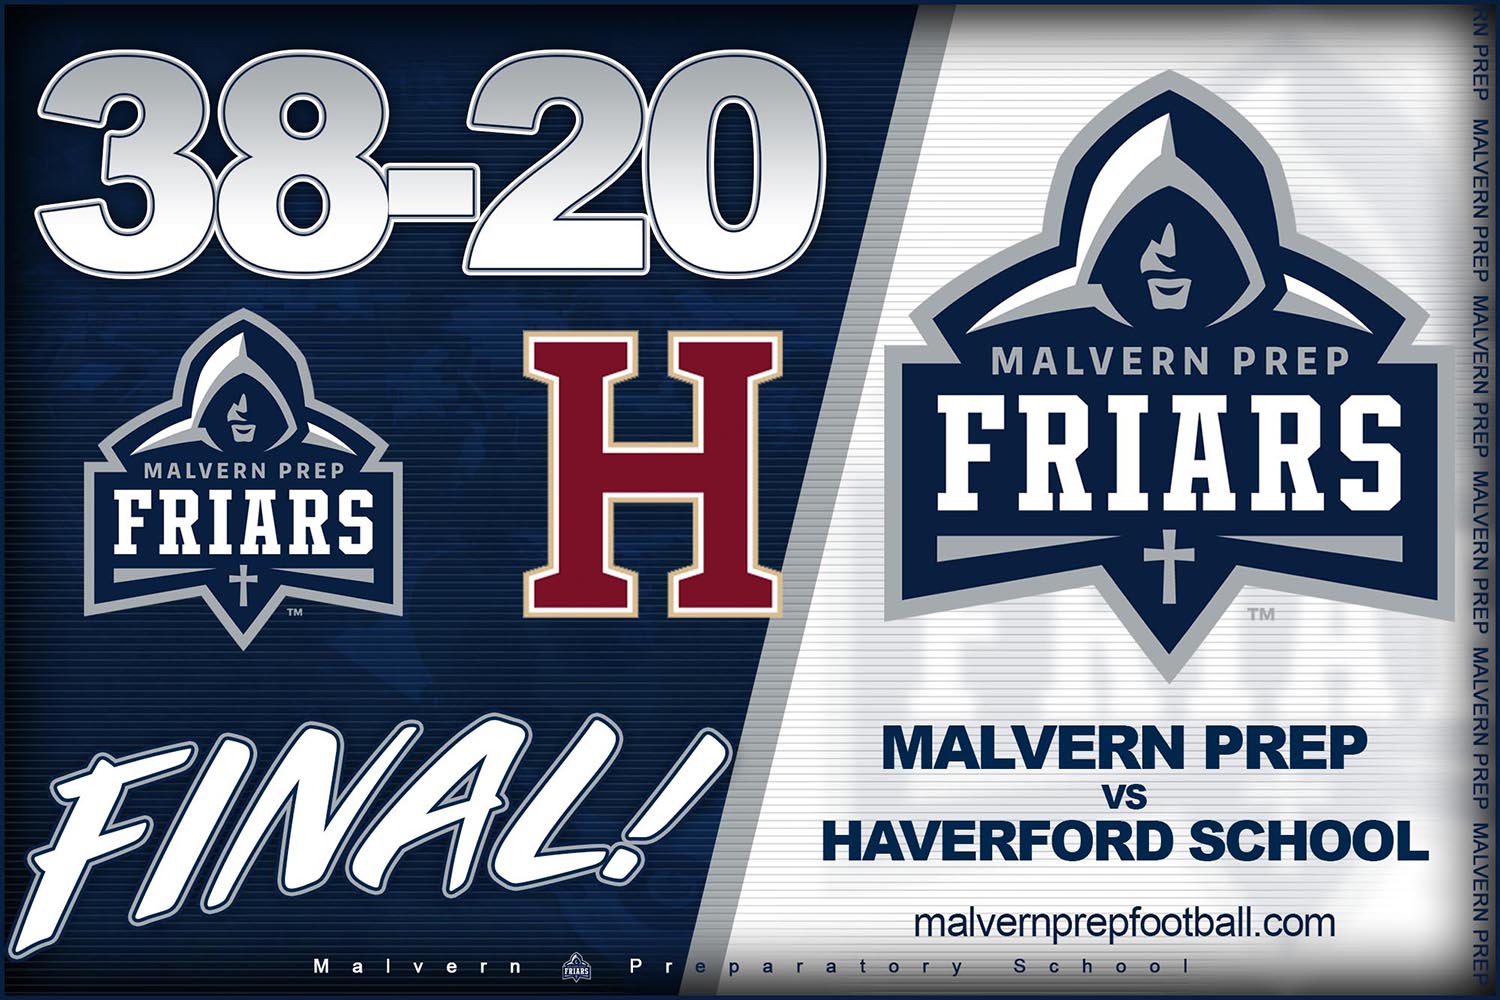 Malvern Prep (PA) Football Team. Home to the Friars 2018 Schedule